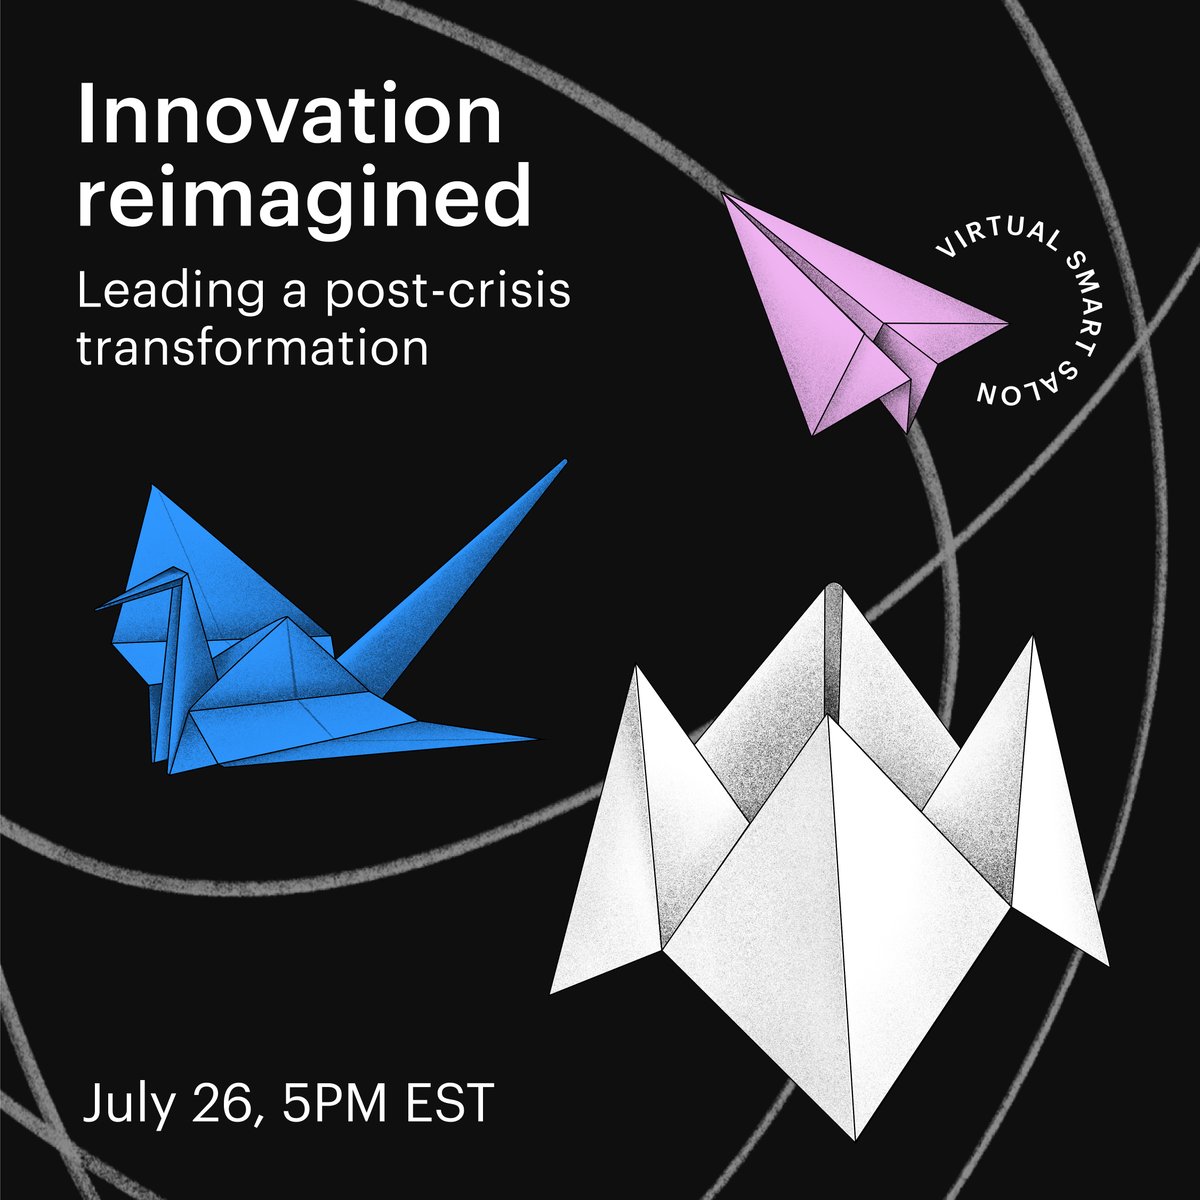 Join Smart Design for a Virtual Smart Salon, Innovation reimagined on Tuesday, July 26 @ 5PM EST. We will welcome panelists from @Logitech, @CP_News, and @Clear for a conversation on innovation for a post-crisis world. Register now. bit.ly/3uIpLdy #virtualsmartsalon